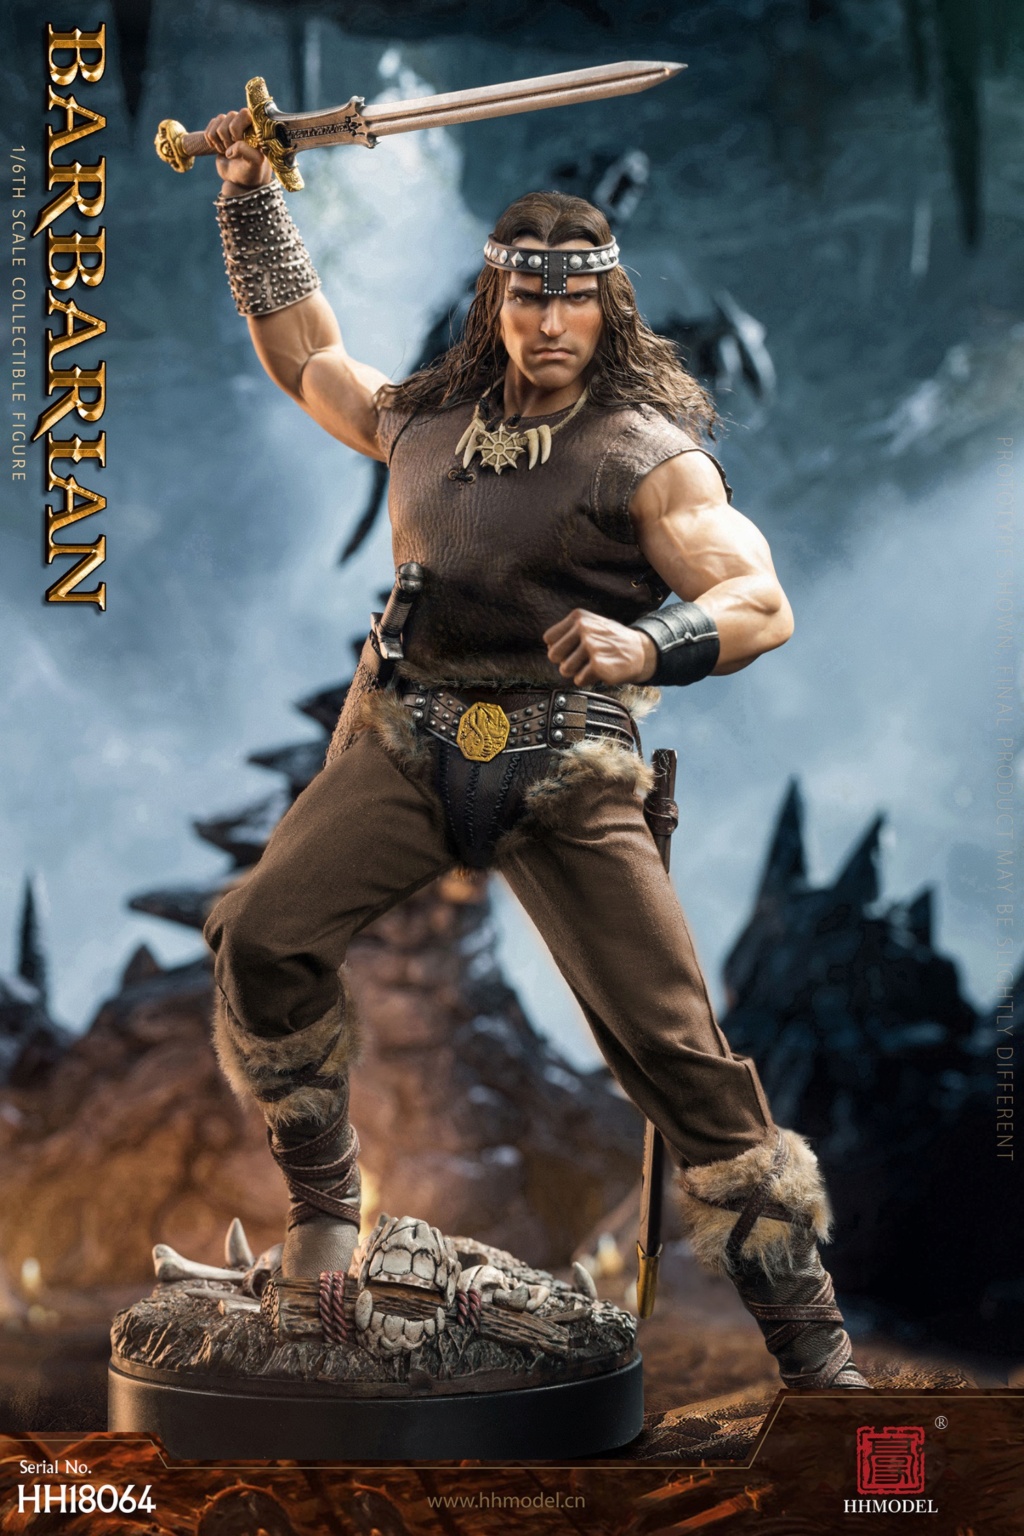 newproduct - NEW PRODUCT: Haoyutoys: HH18064 1/6 Scale The Barbarian 18002110